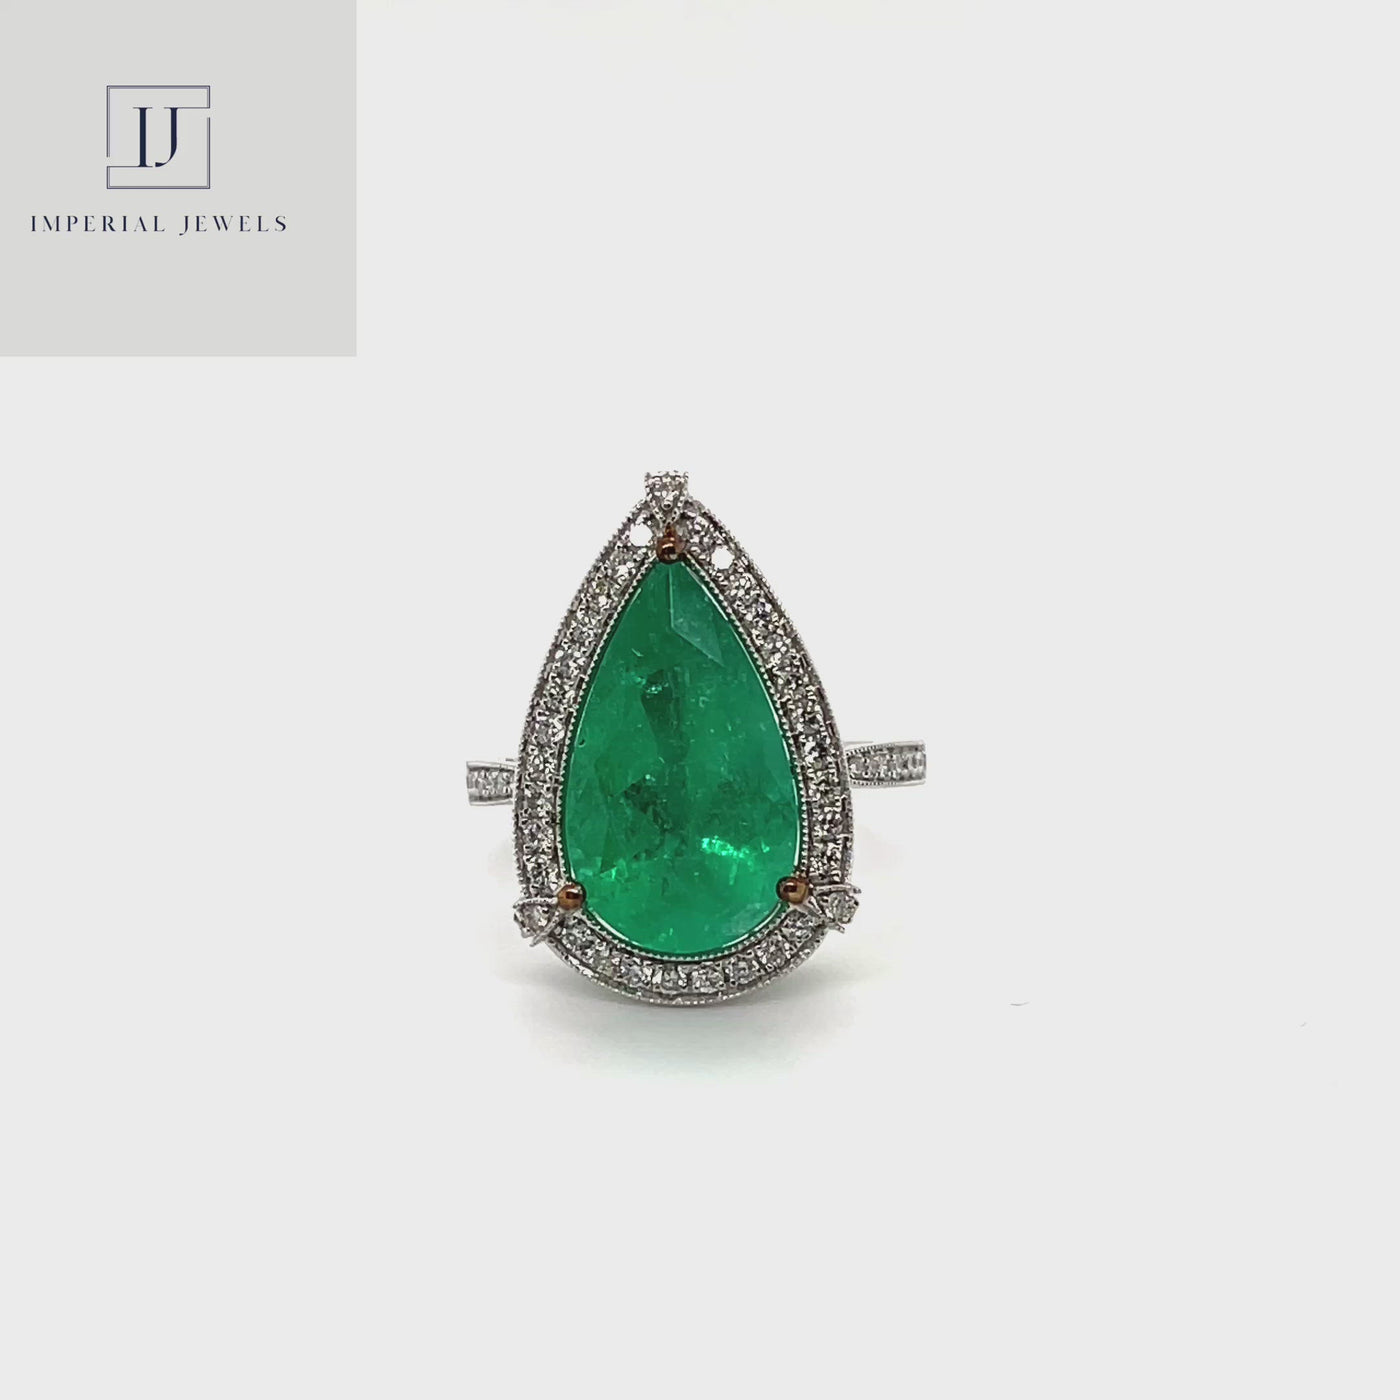 18CT white gold Colombian Pear emerald and diamond ring